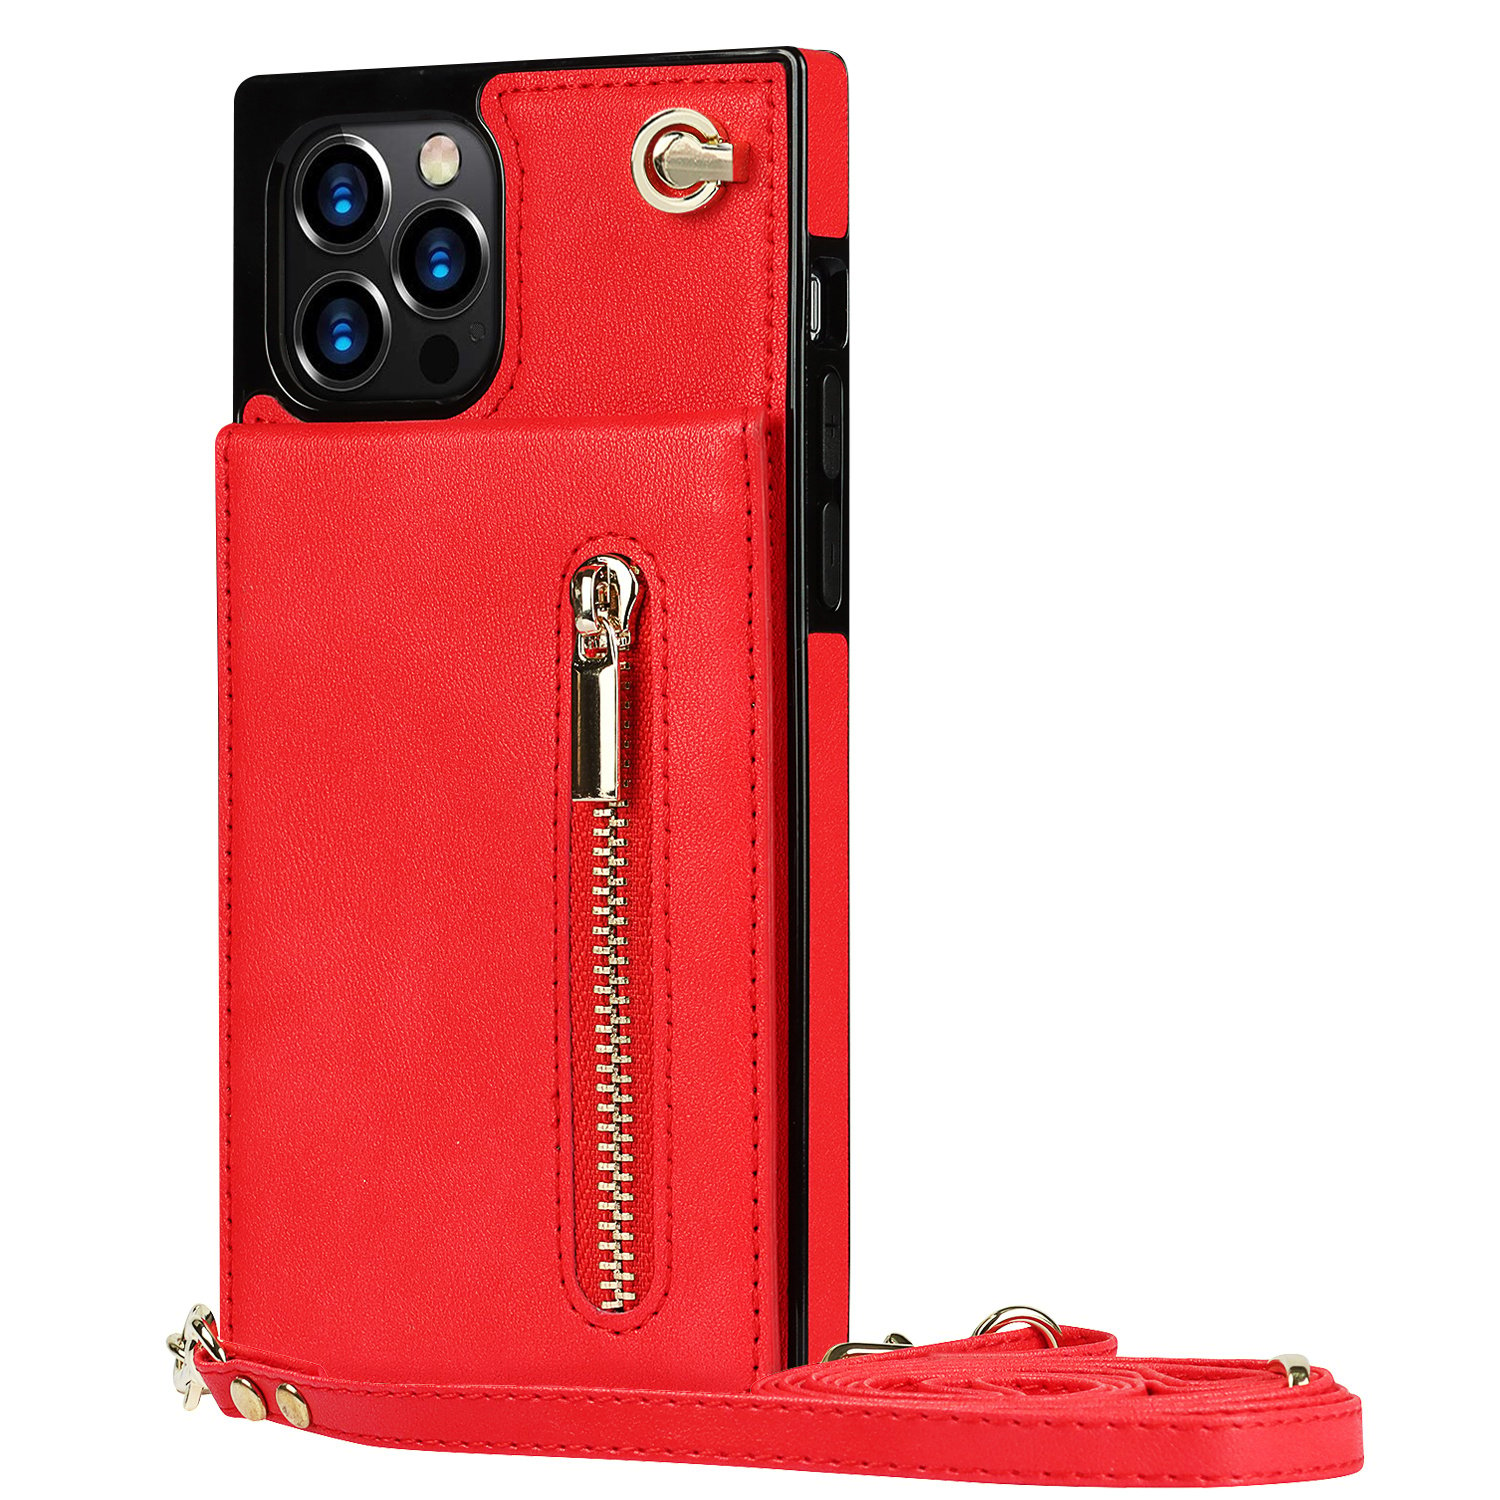 Samsung Galaxy S22 Plus  Back Cover Hoesje met Koord - Pasjeshouder - PU Leer - Koord - Samsung Galaxy S22 Plus  - Rood